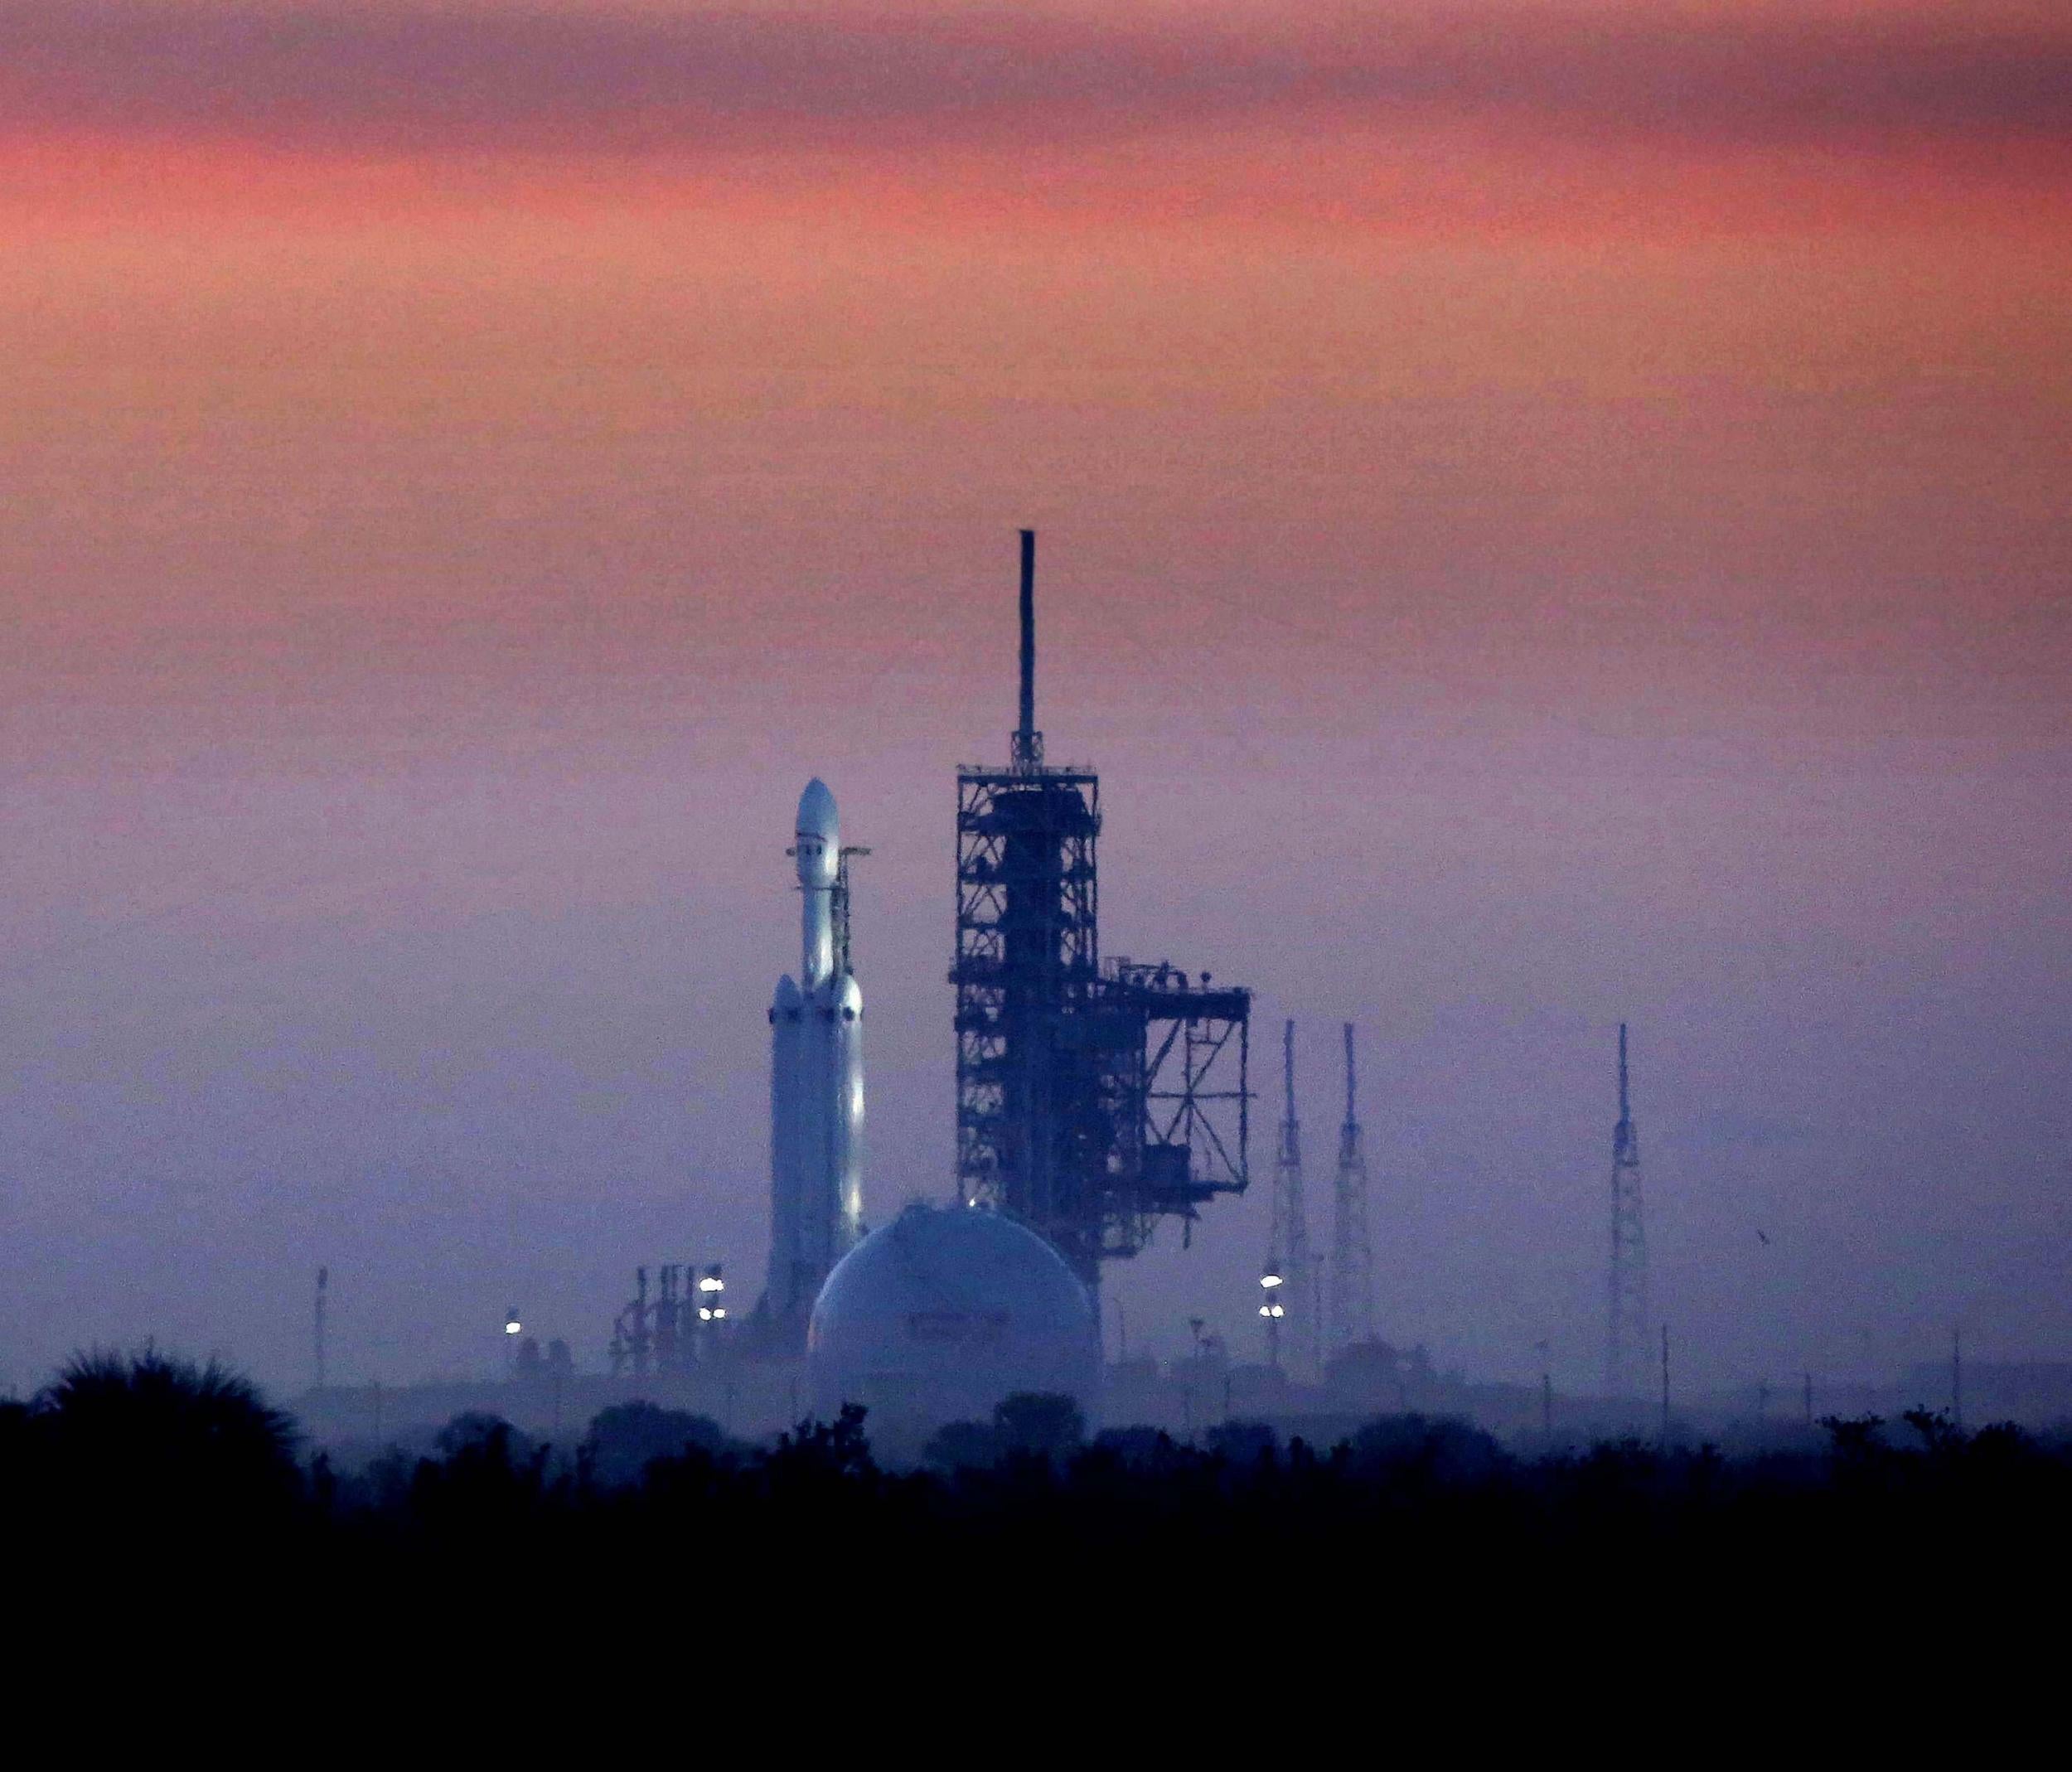 Enveloped in morning fog, the SpaceX Falcon Heavy sits on launchpad 39A at first light, in this view from Playalinda Beach, Florida